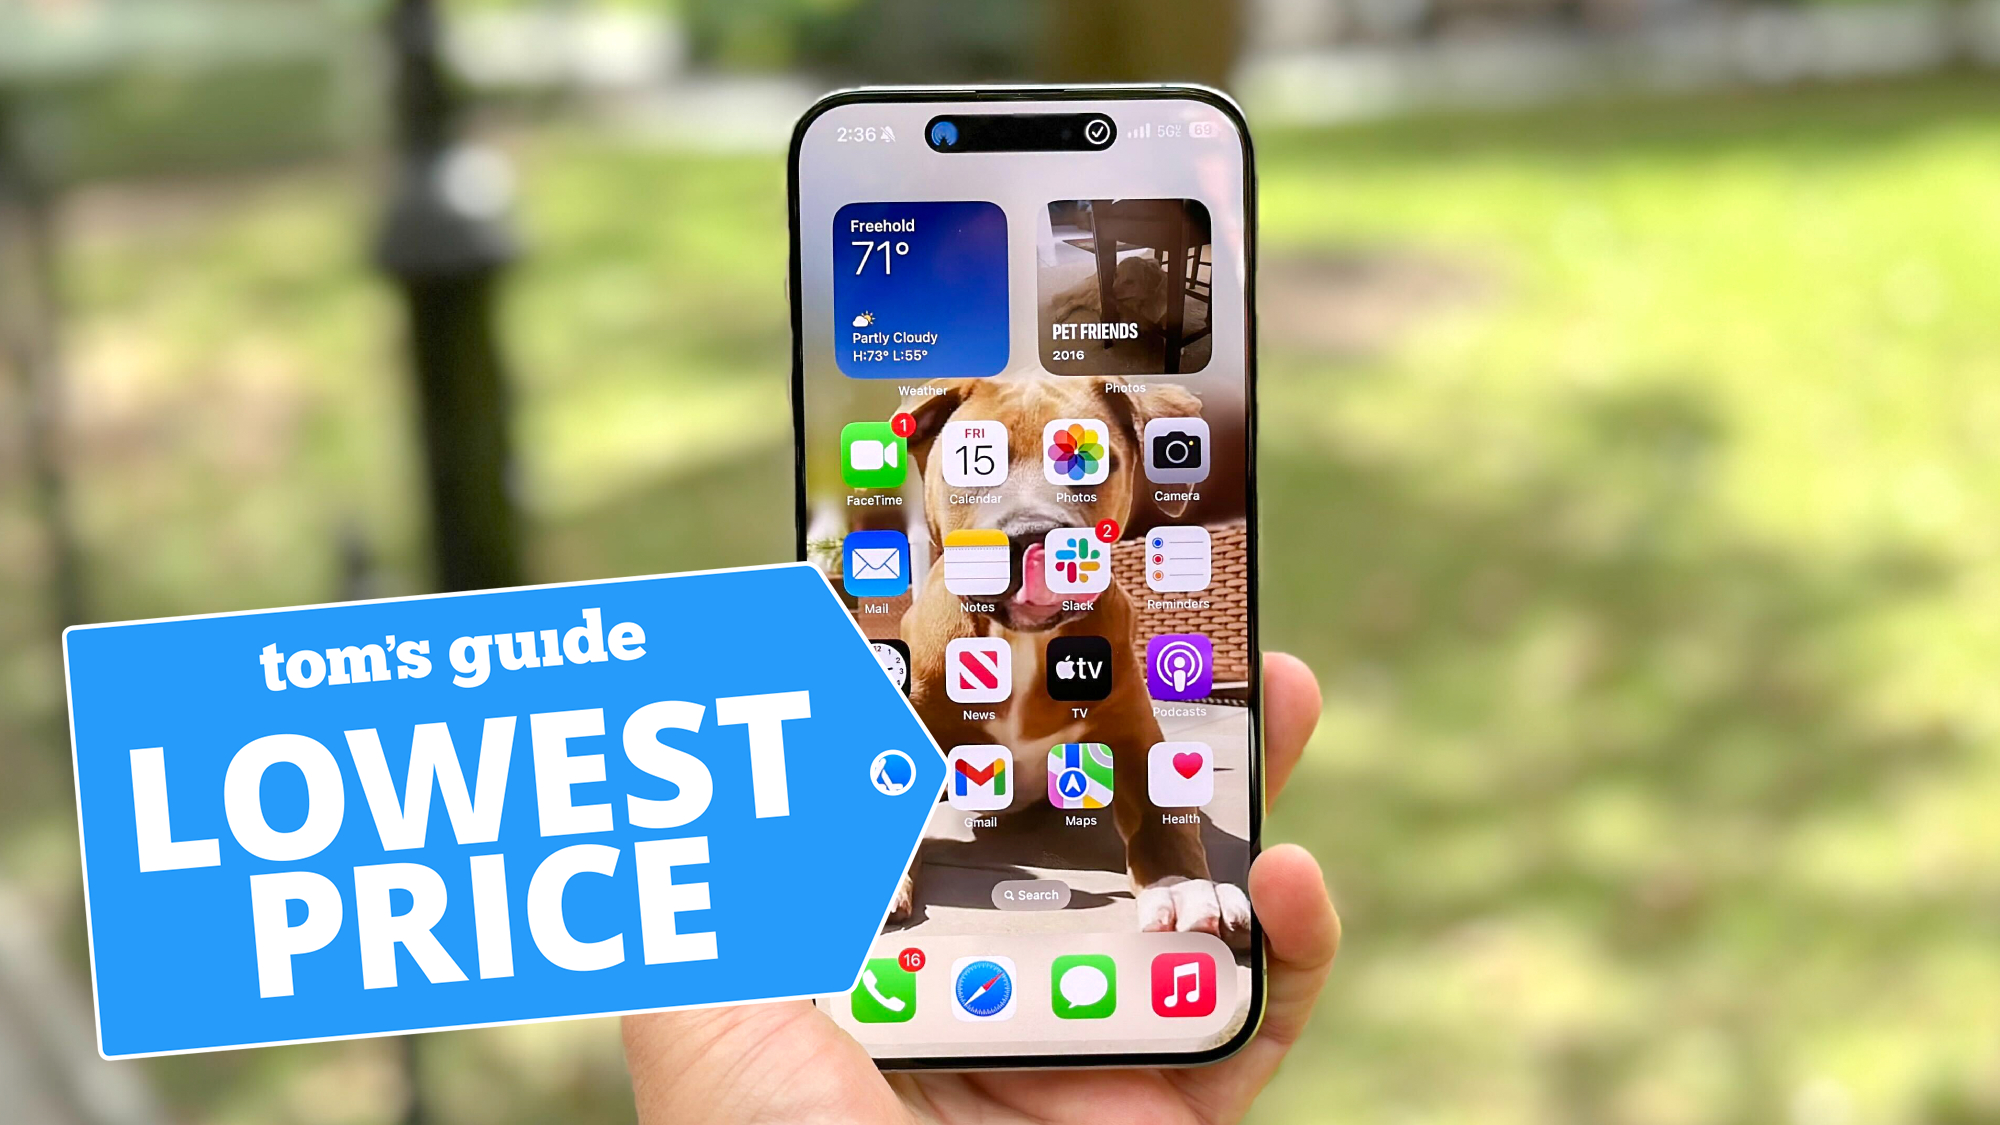 Apple iPhone 15 Pro Contract Deals at Great Prices